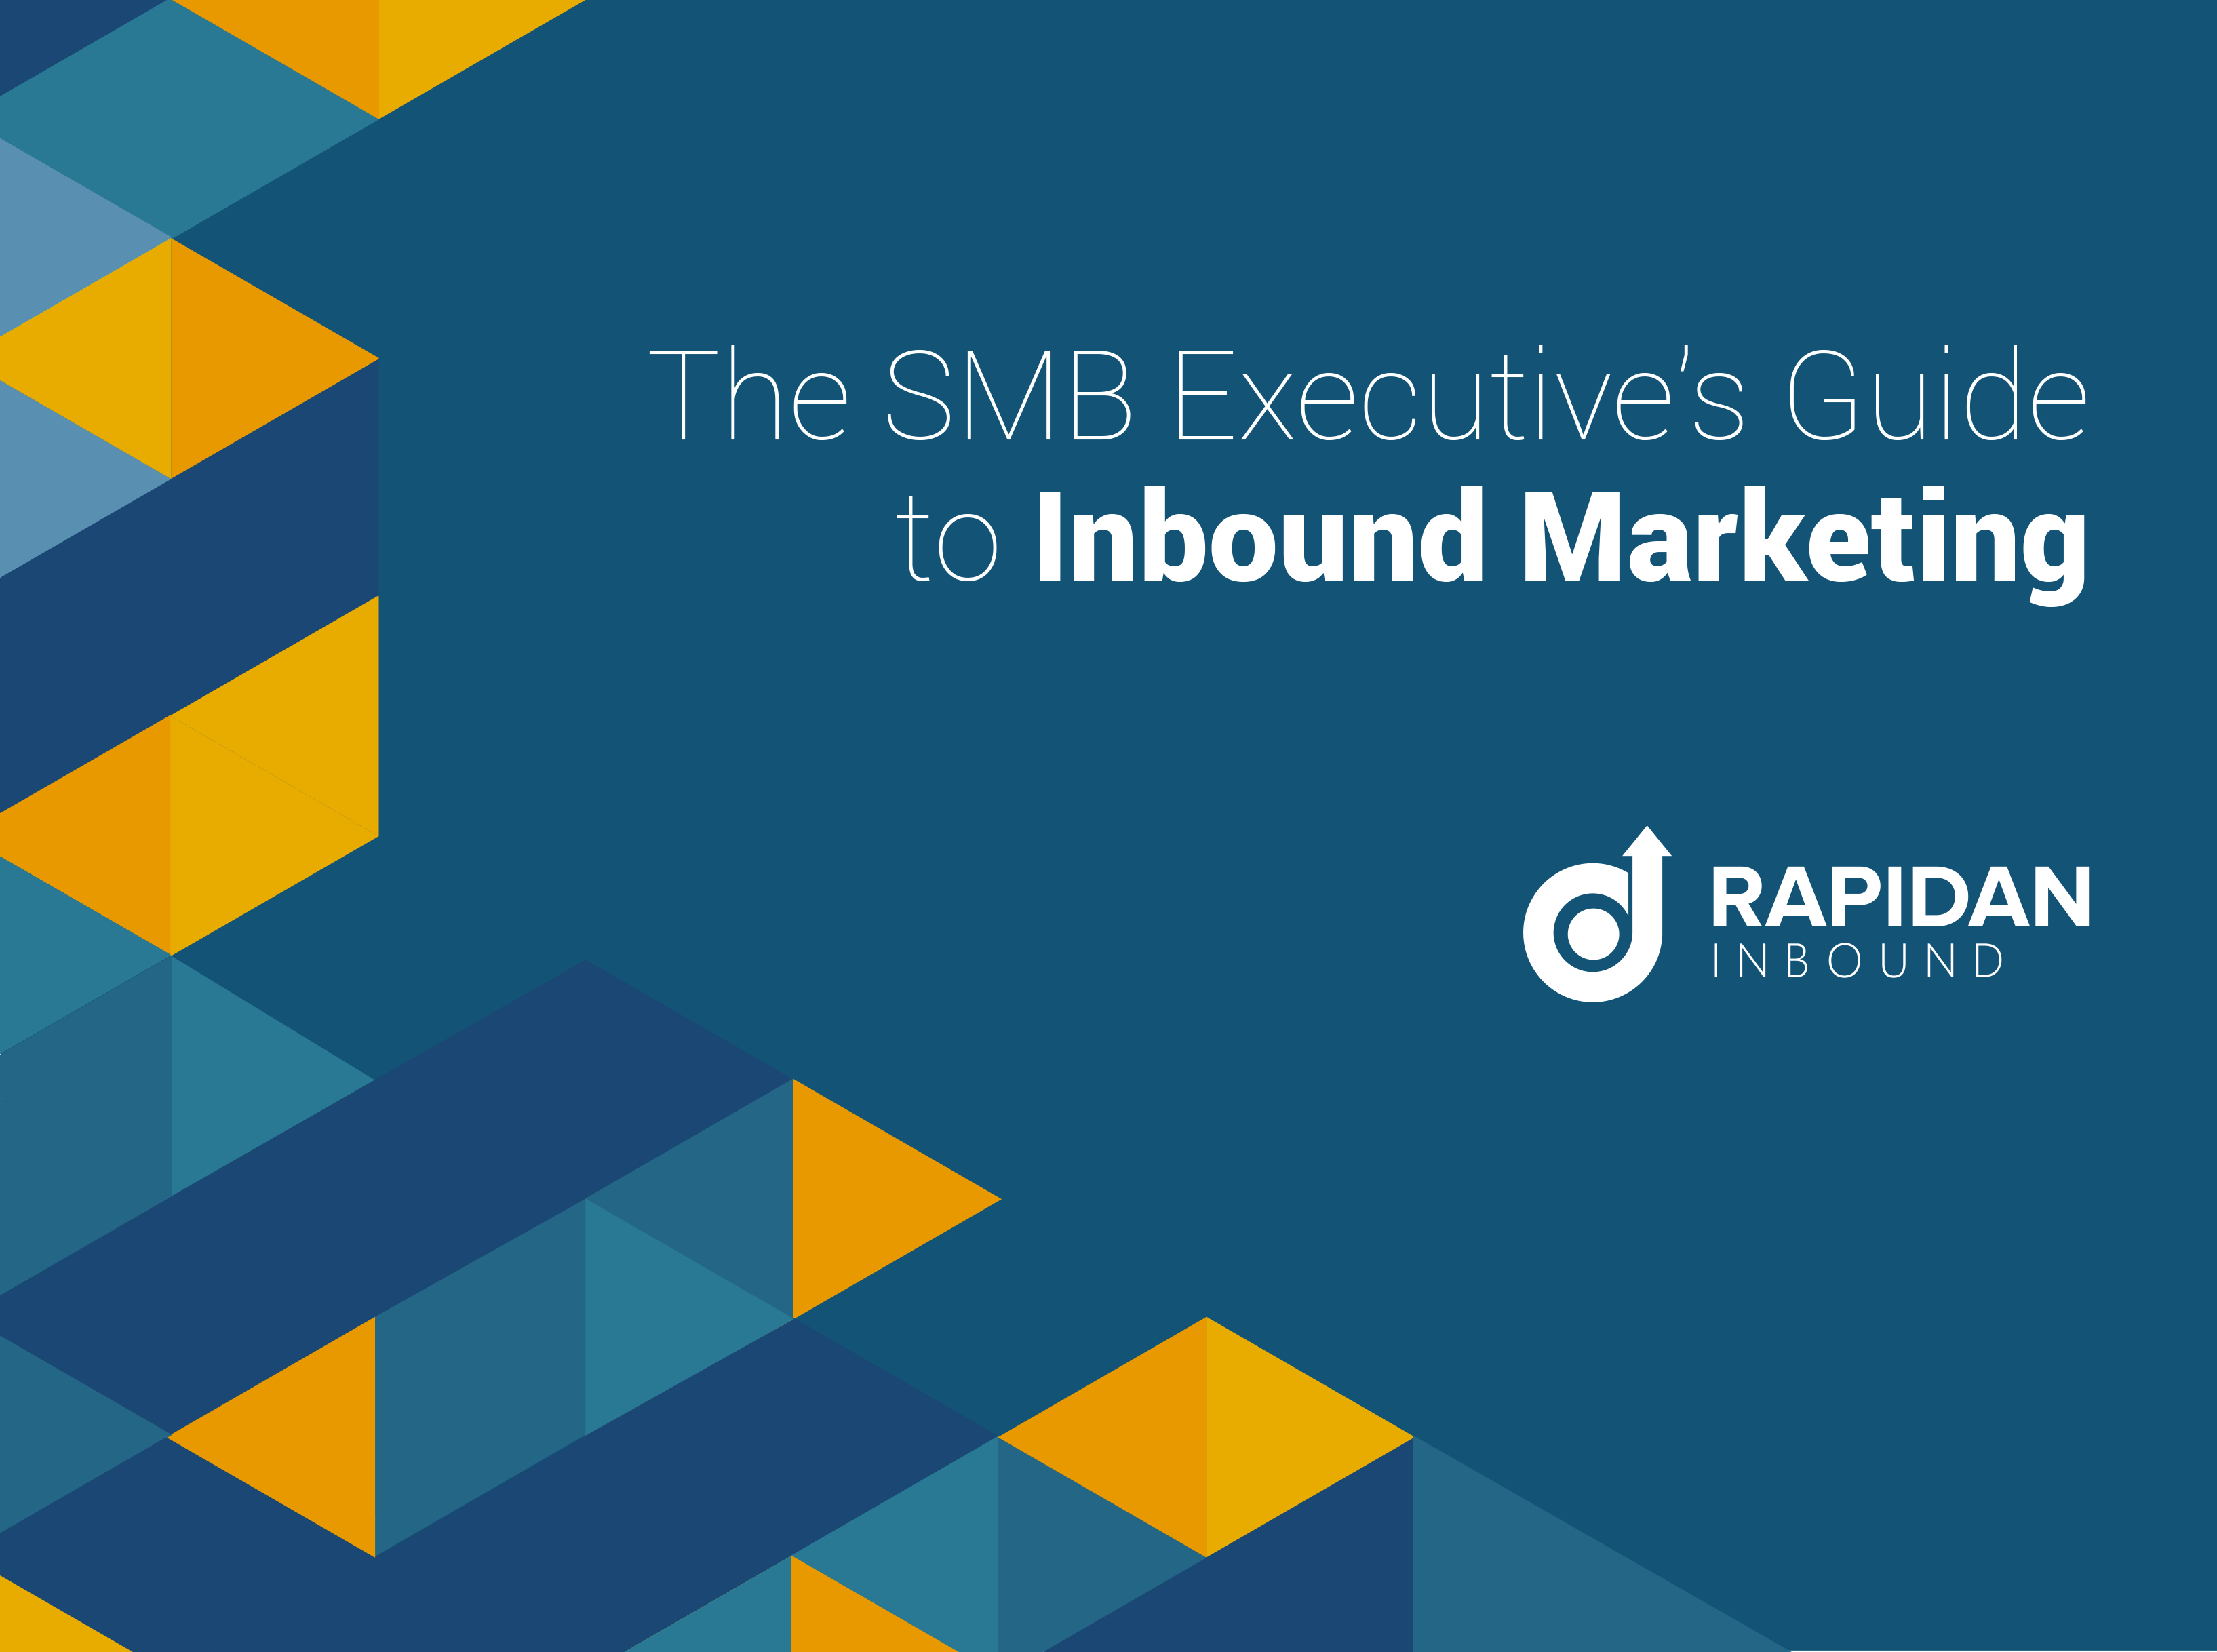 The SMB Executive Guide To Inbound Marketing-1